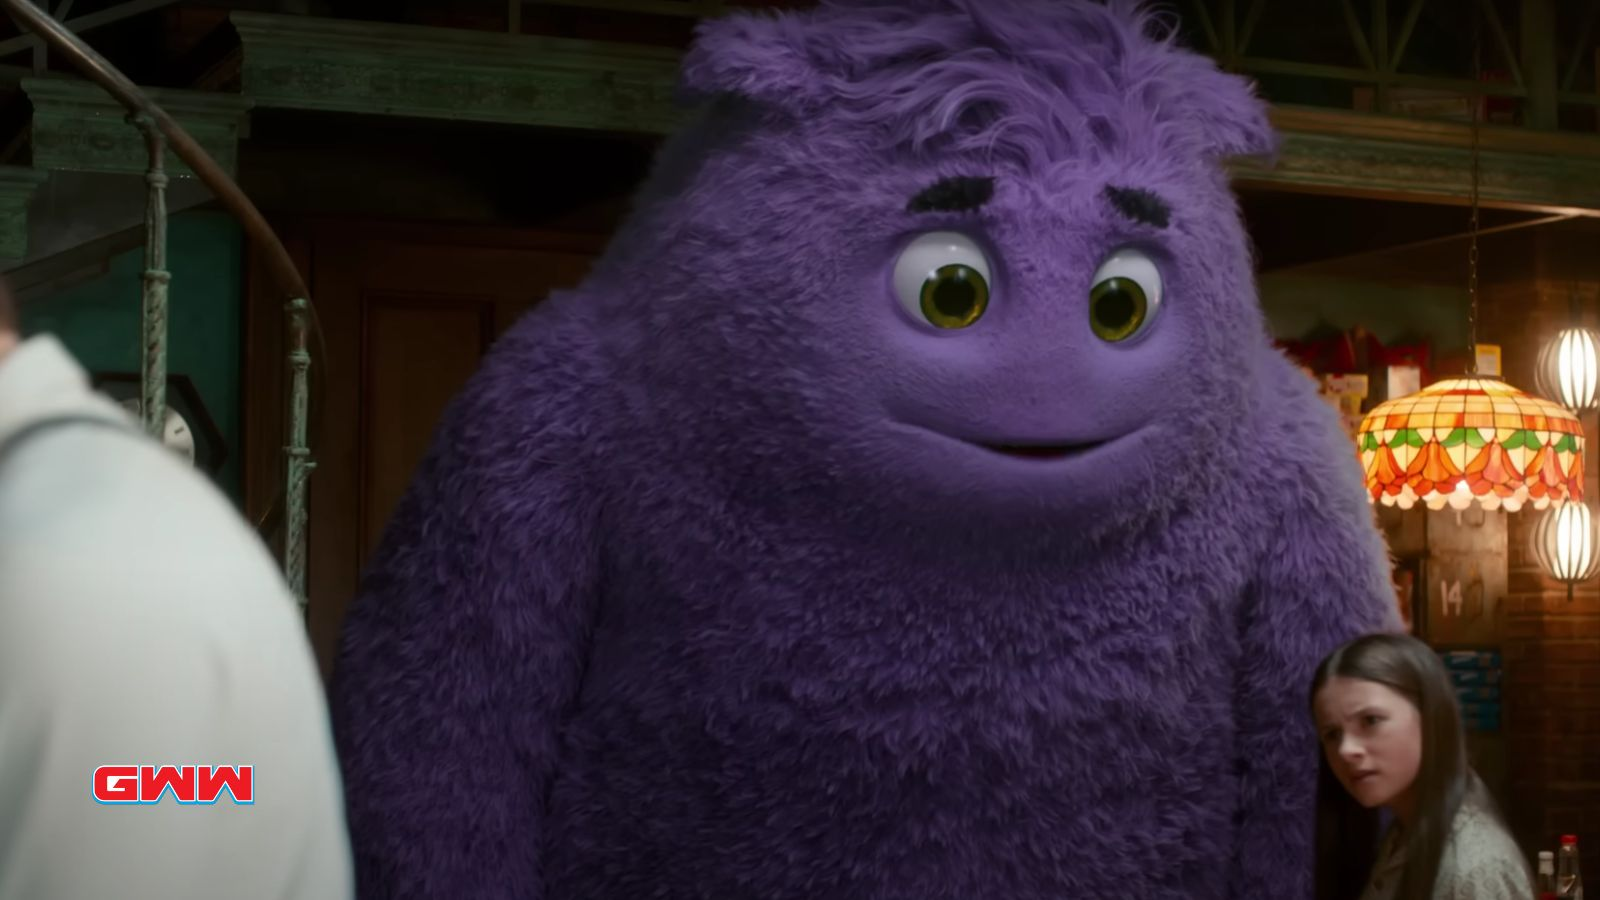 Blue, a giant, purple, furry imaginary friend in IF movie trailer